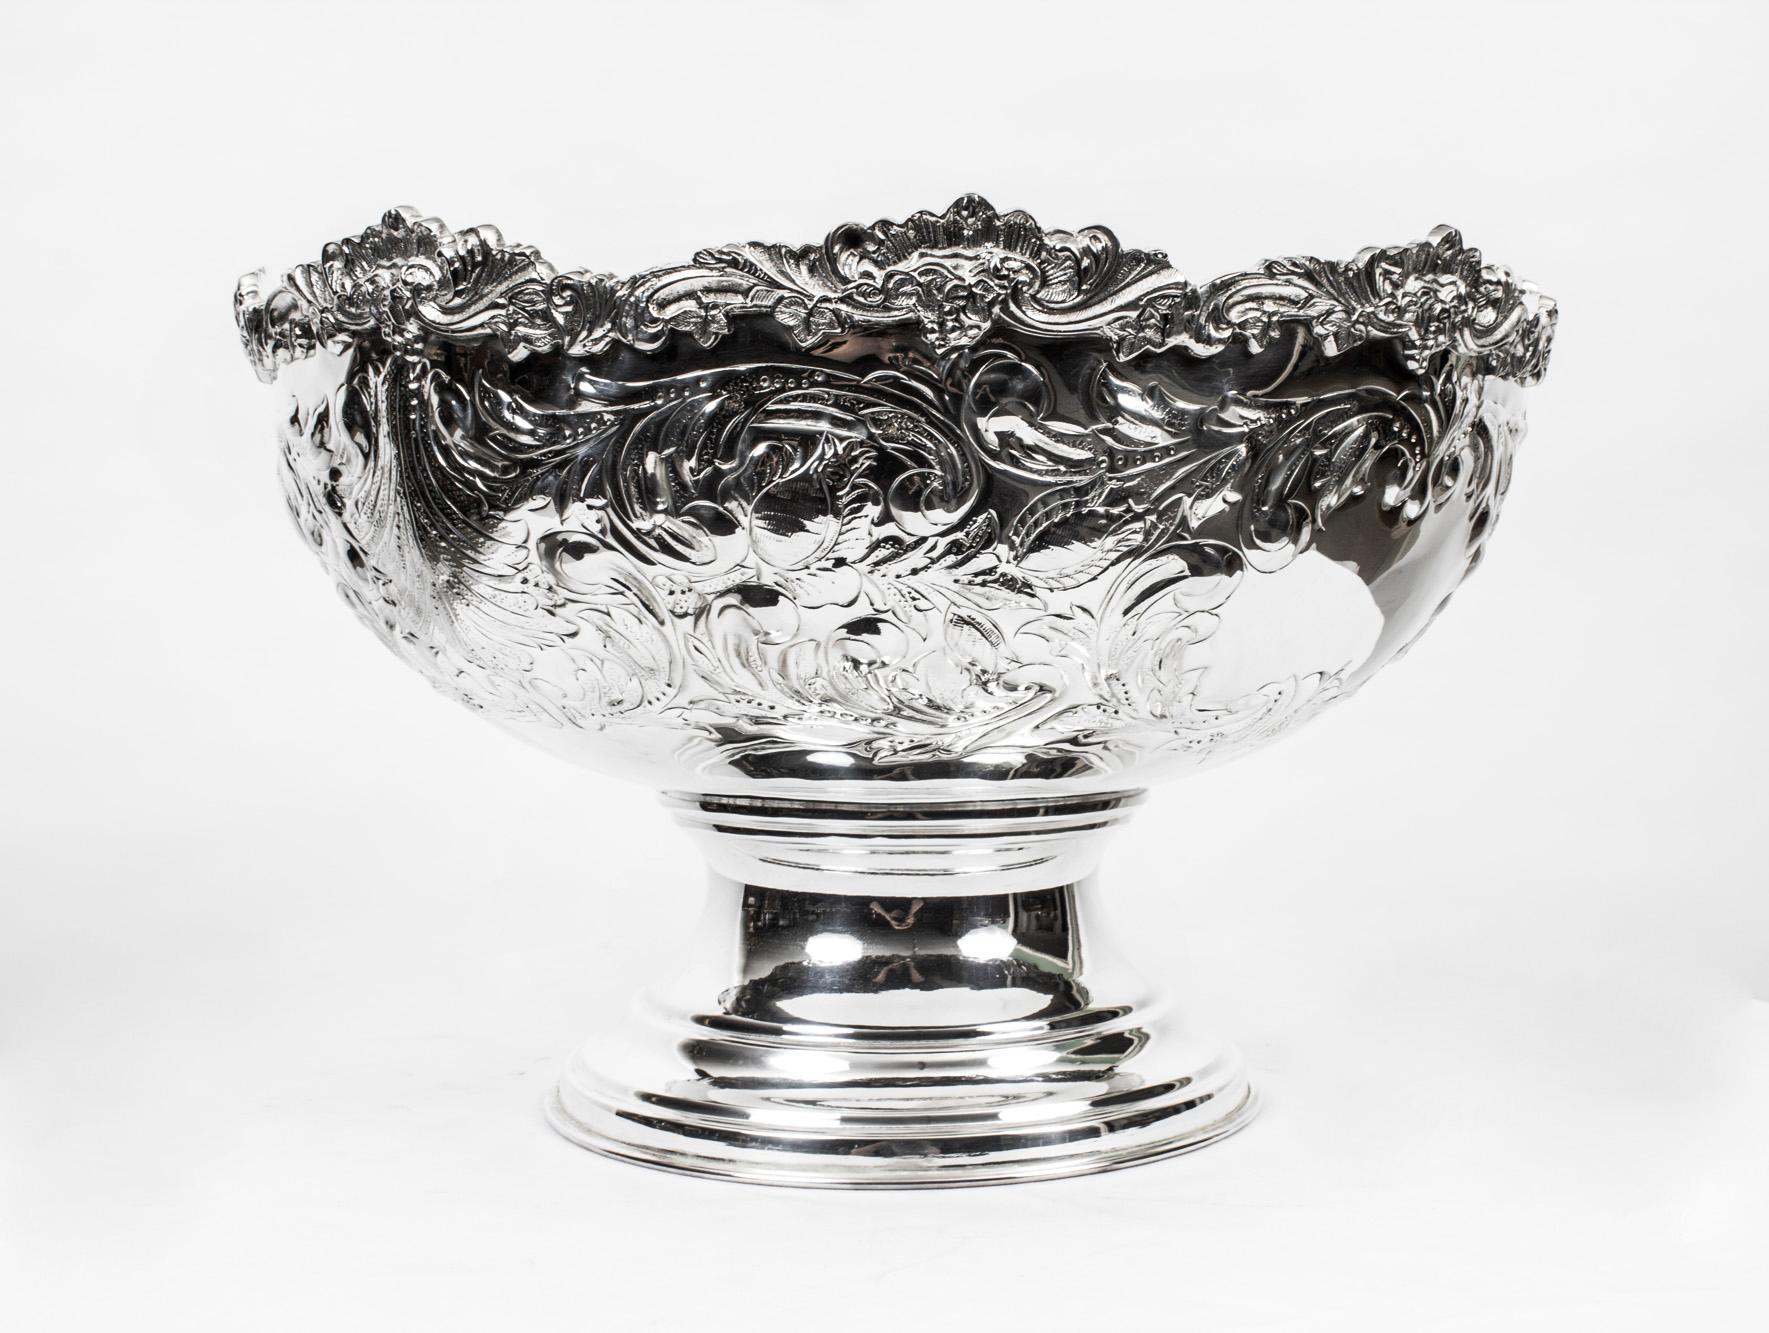 This is a gorgeous vintage silver plated champagne cooler that can hold over 6 bottles, dating from the late 20th Century.

This exquisite punch bowl has a beautiful and incredibly detailed embossed floral decoration with garlands of flowers.

This